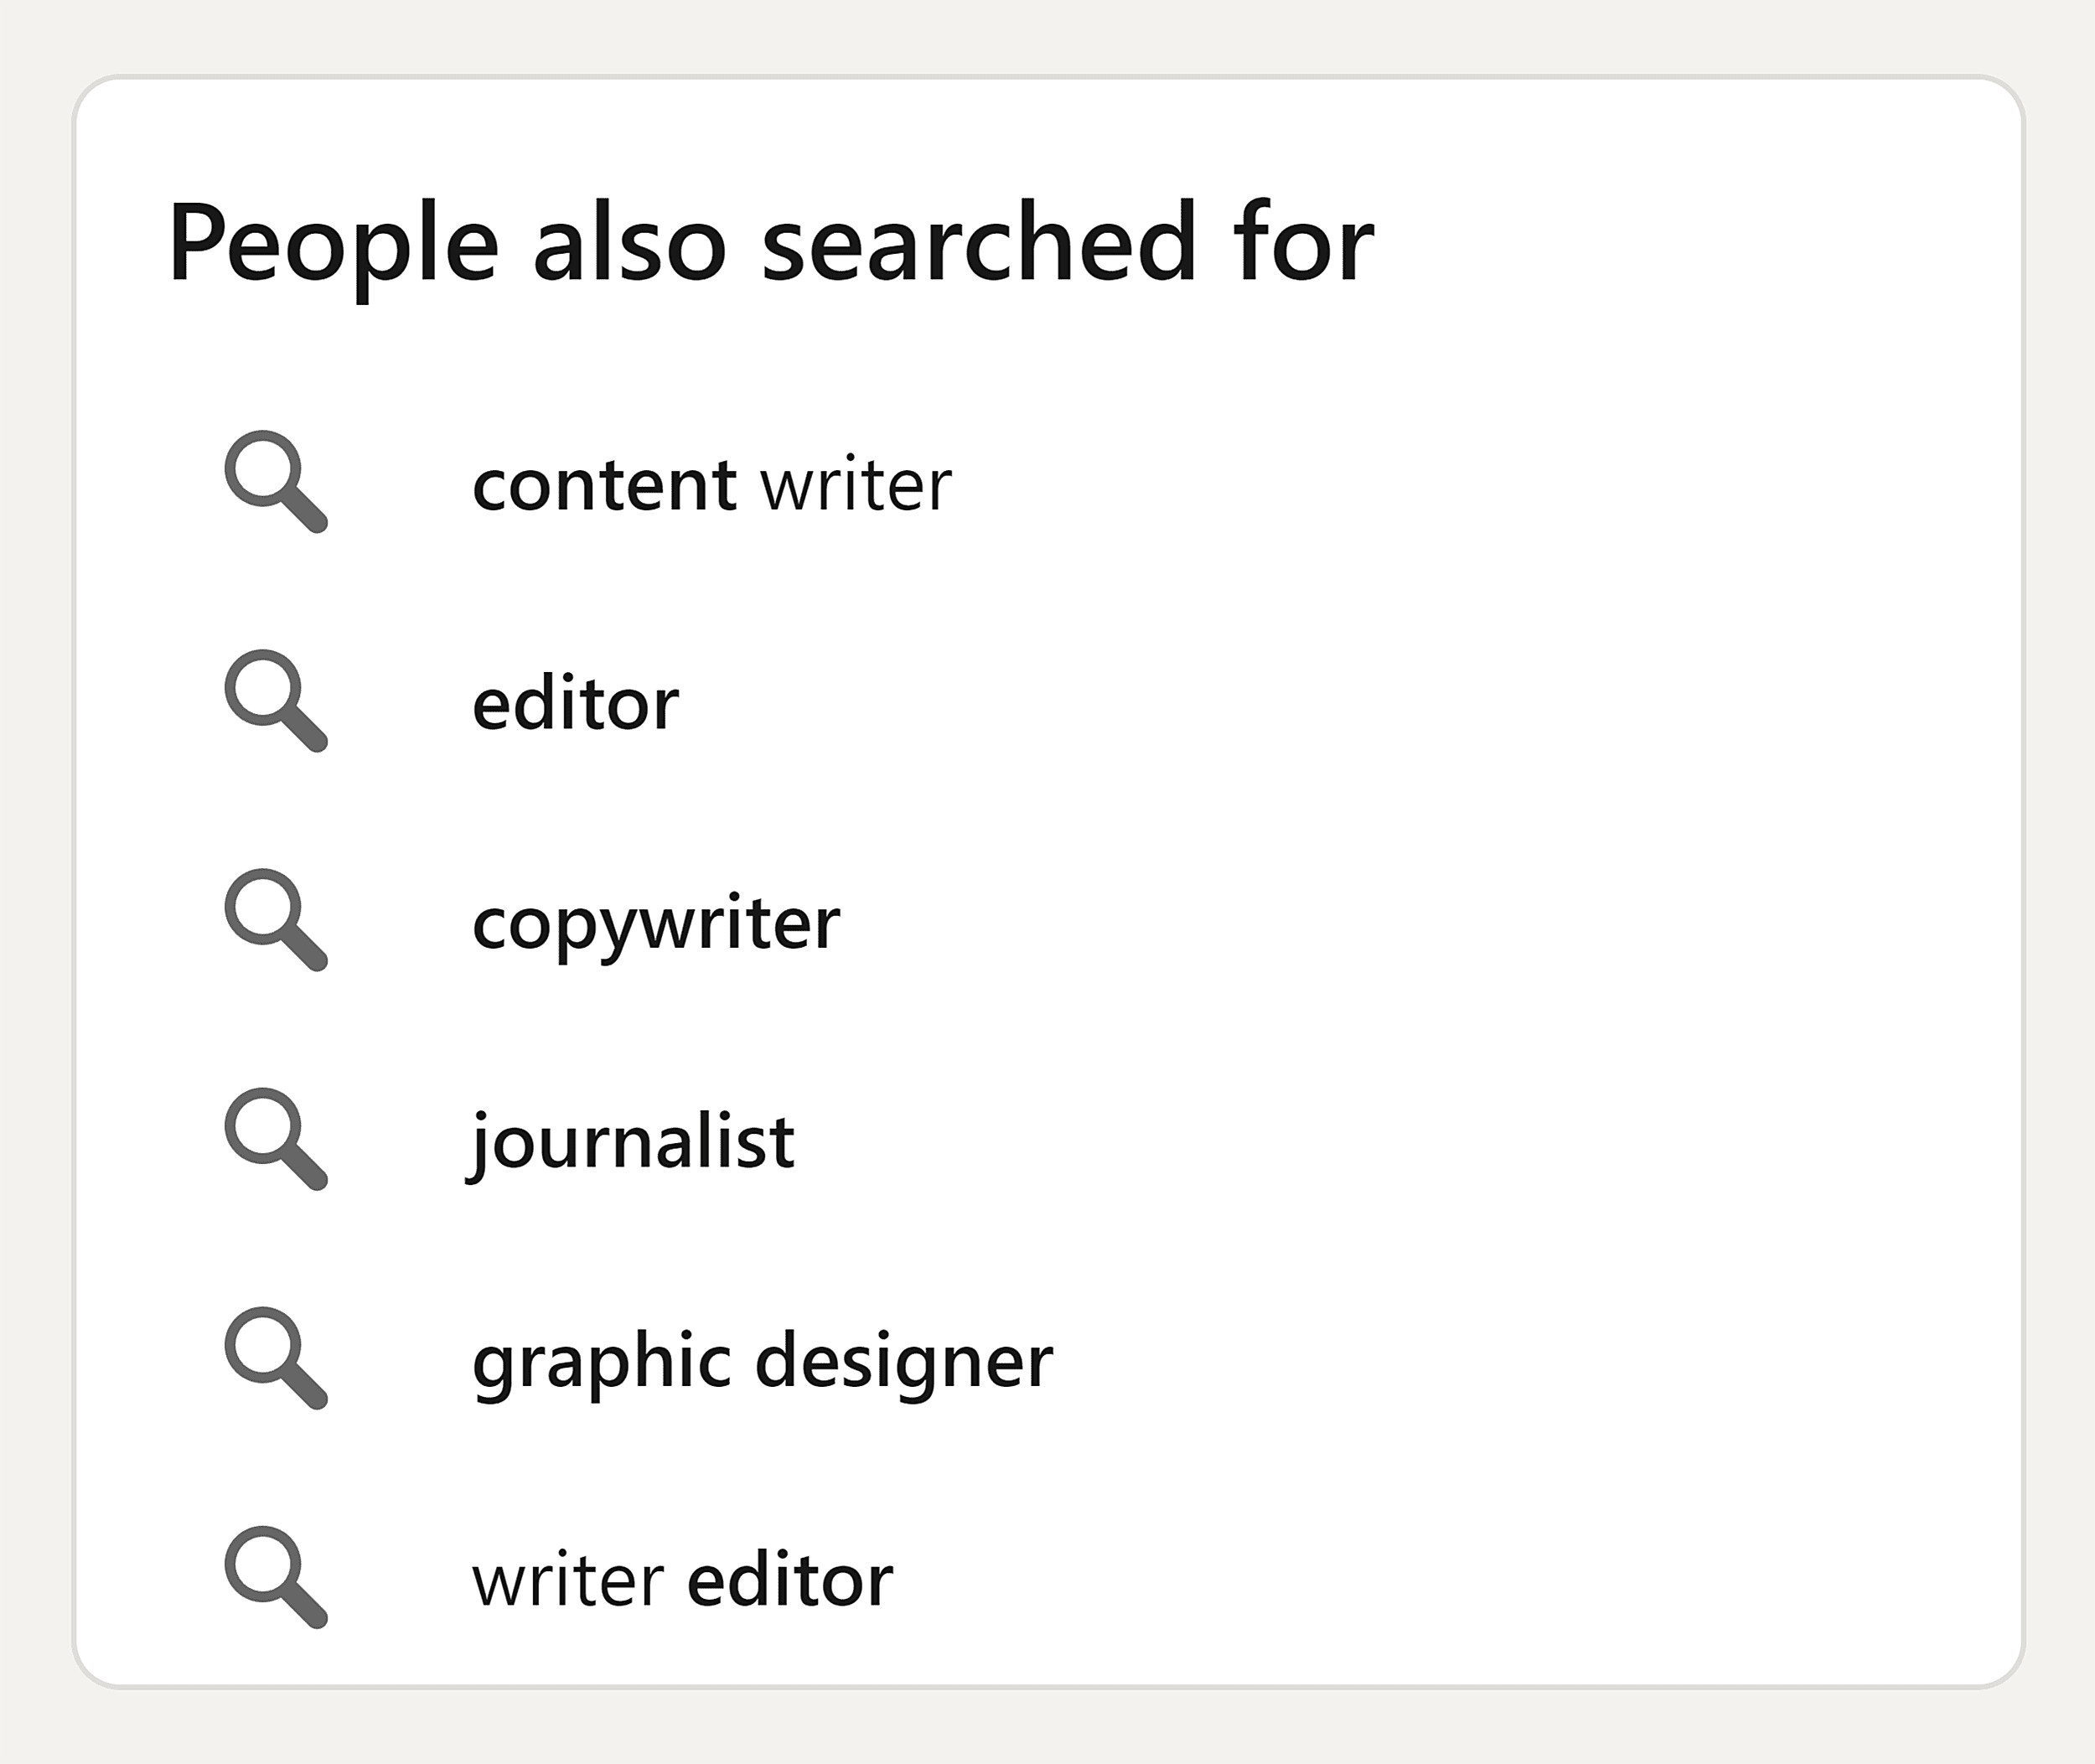 LinkedIn – People also searched for